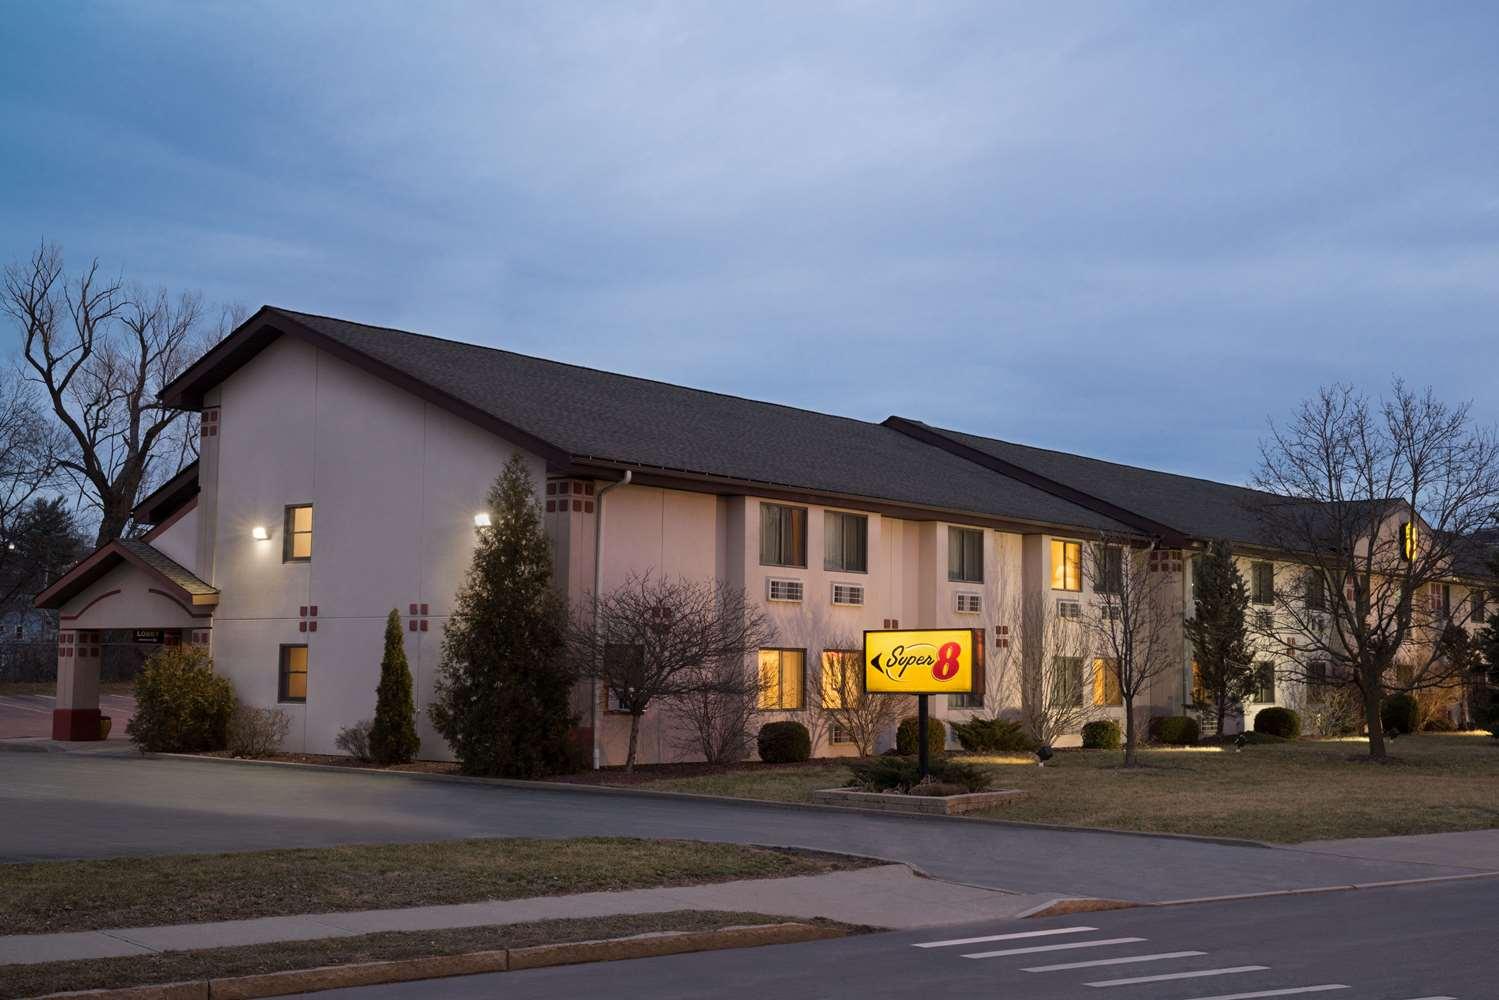 Super 8 by Wyndham Ithaca in Ithaca, NY